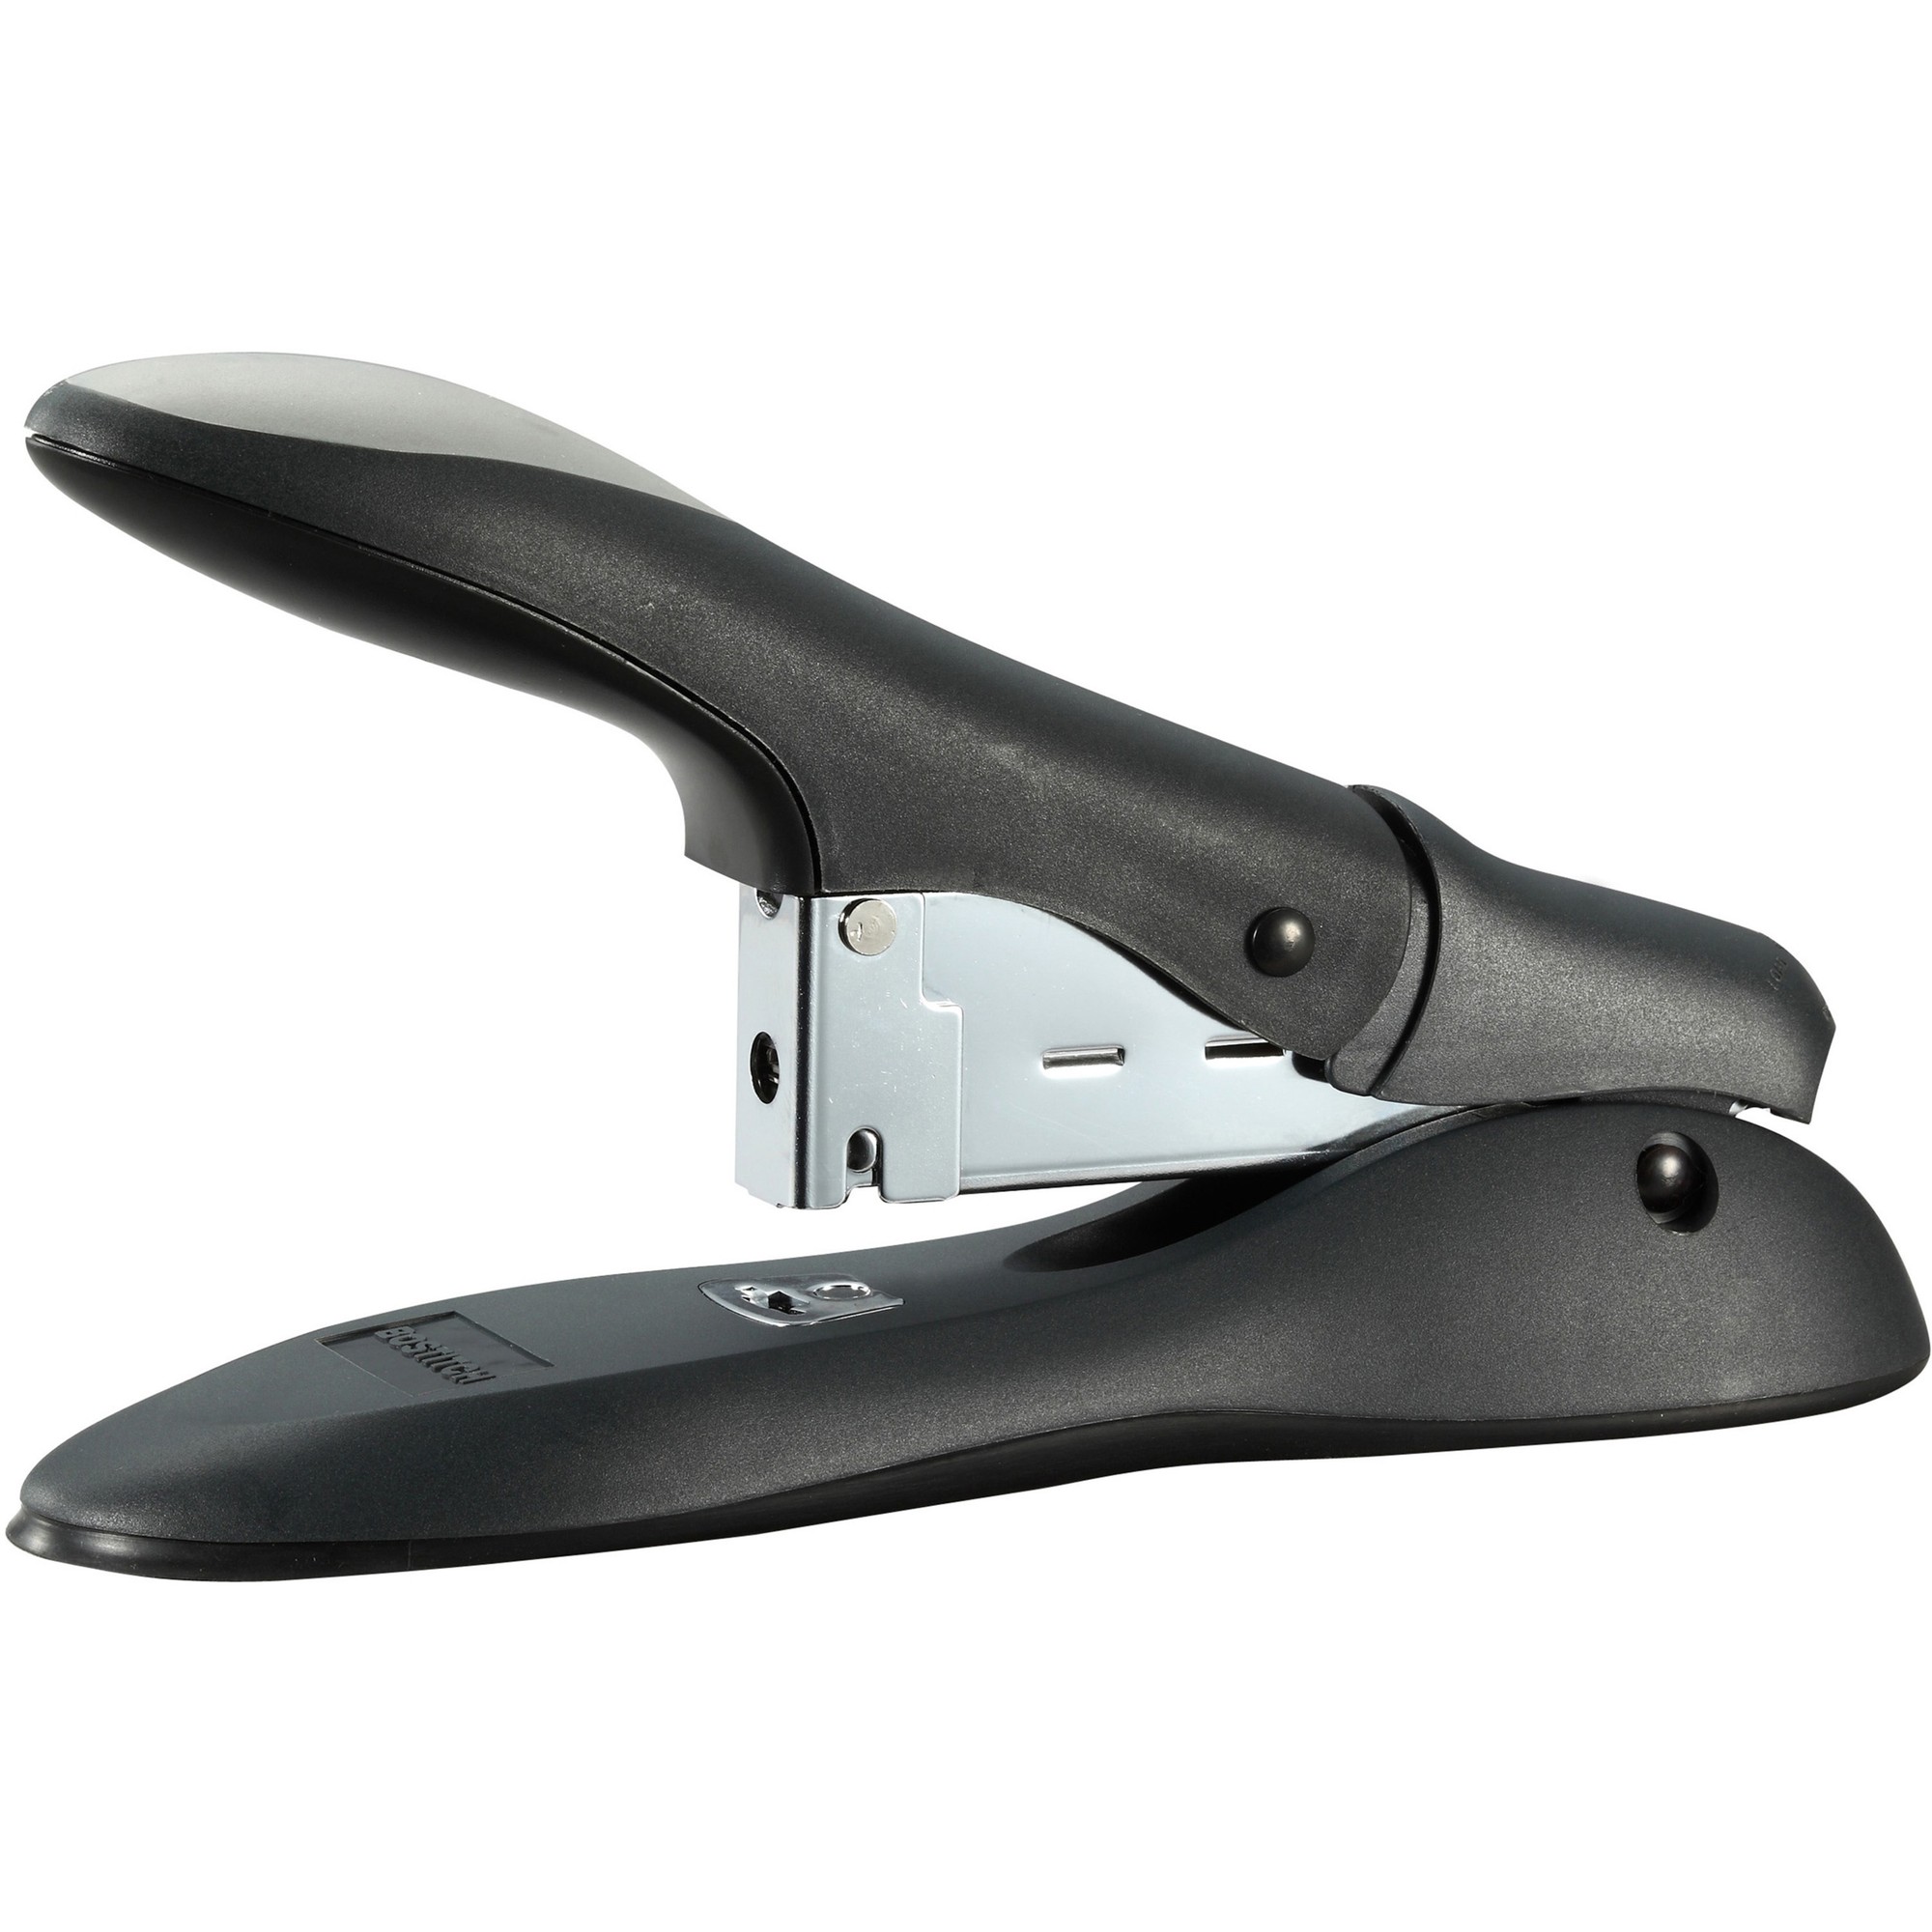 Bostitch Personal Heavy Duty Stapler - 60 of 20lb Paper Sheets Capacity - Black